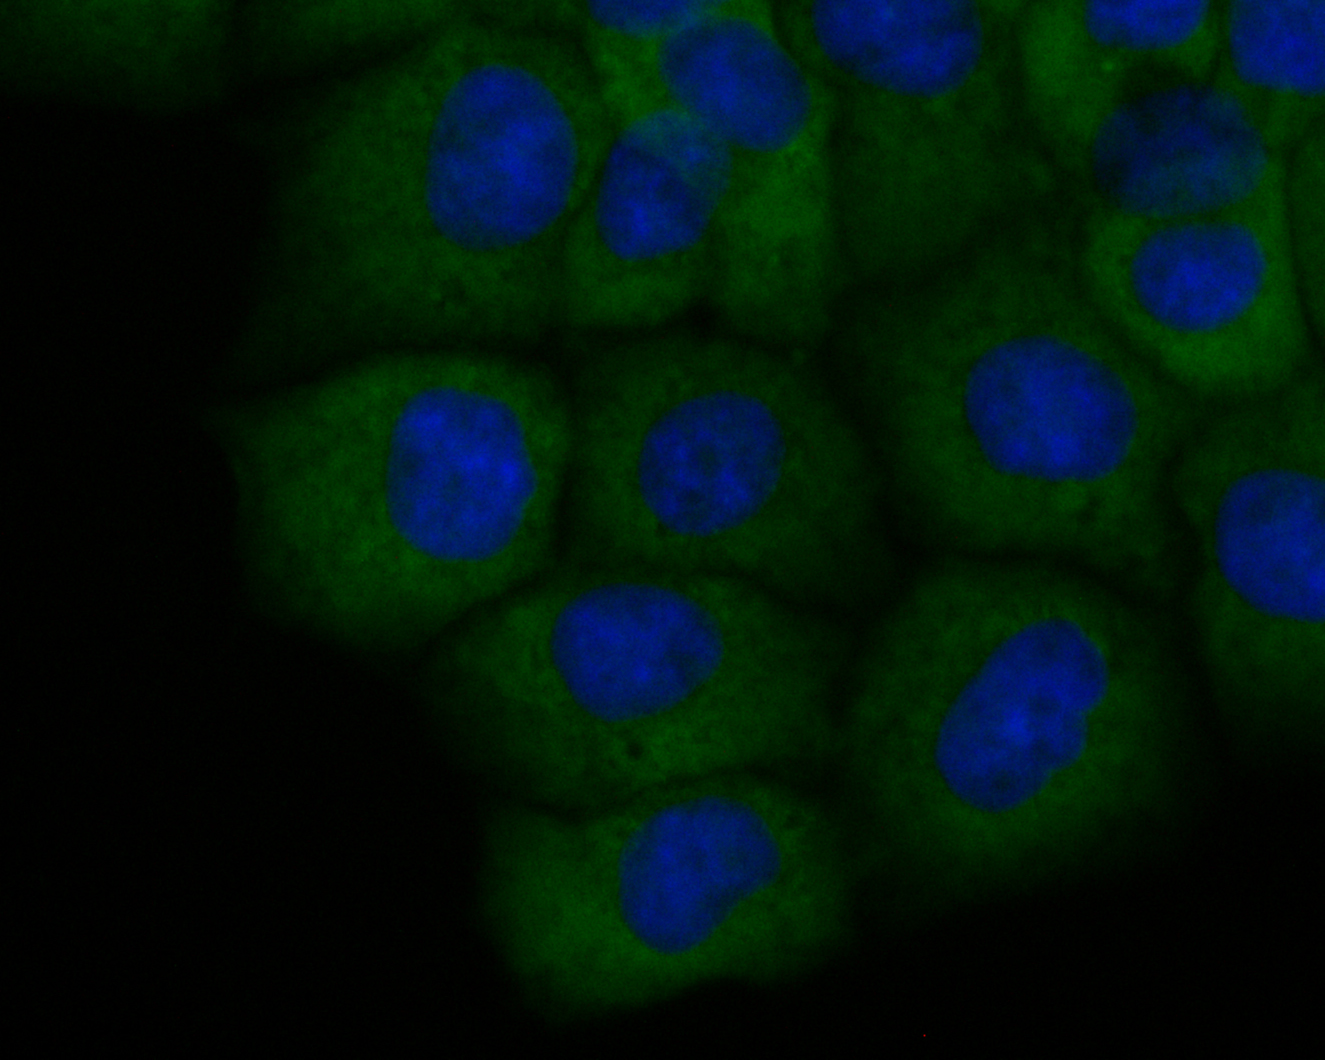 ICC staining of ETN1 in JAR cells (green). Formalin fixed cells were permeabilized with 0.1% Triton X-100 in TBS for 10 minutes at room temperature and blocked with 1% Blocker BSA for 15 minutes at room temperature. Cells were probed with the primary antibody (ER1902-43, 1/50) for 1 hour at room temperature, washed with PBS. Alexa Fluor®488 Goat anti-Rabbit IgG was used as the secondary antibody at 1/1,000 dilution. The nuclear counter stain is DAPI (blue).